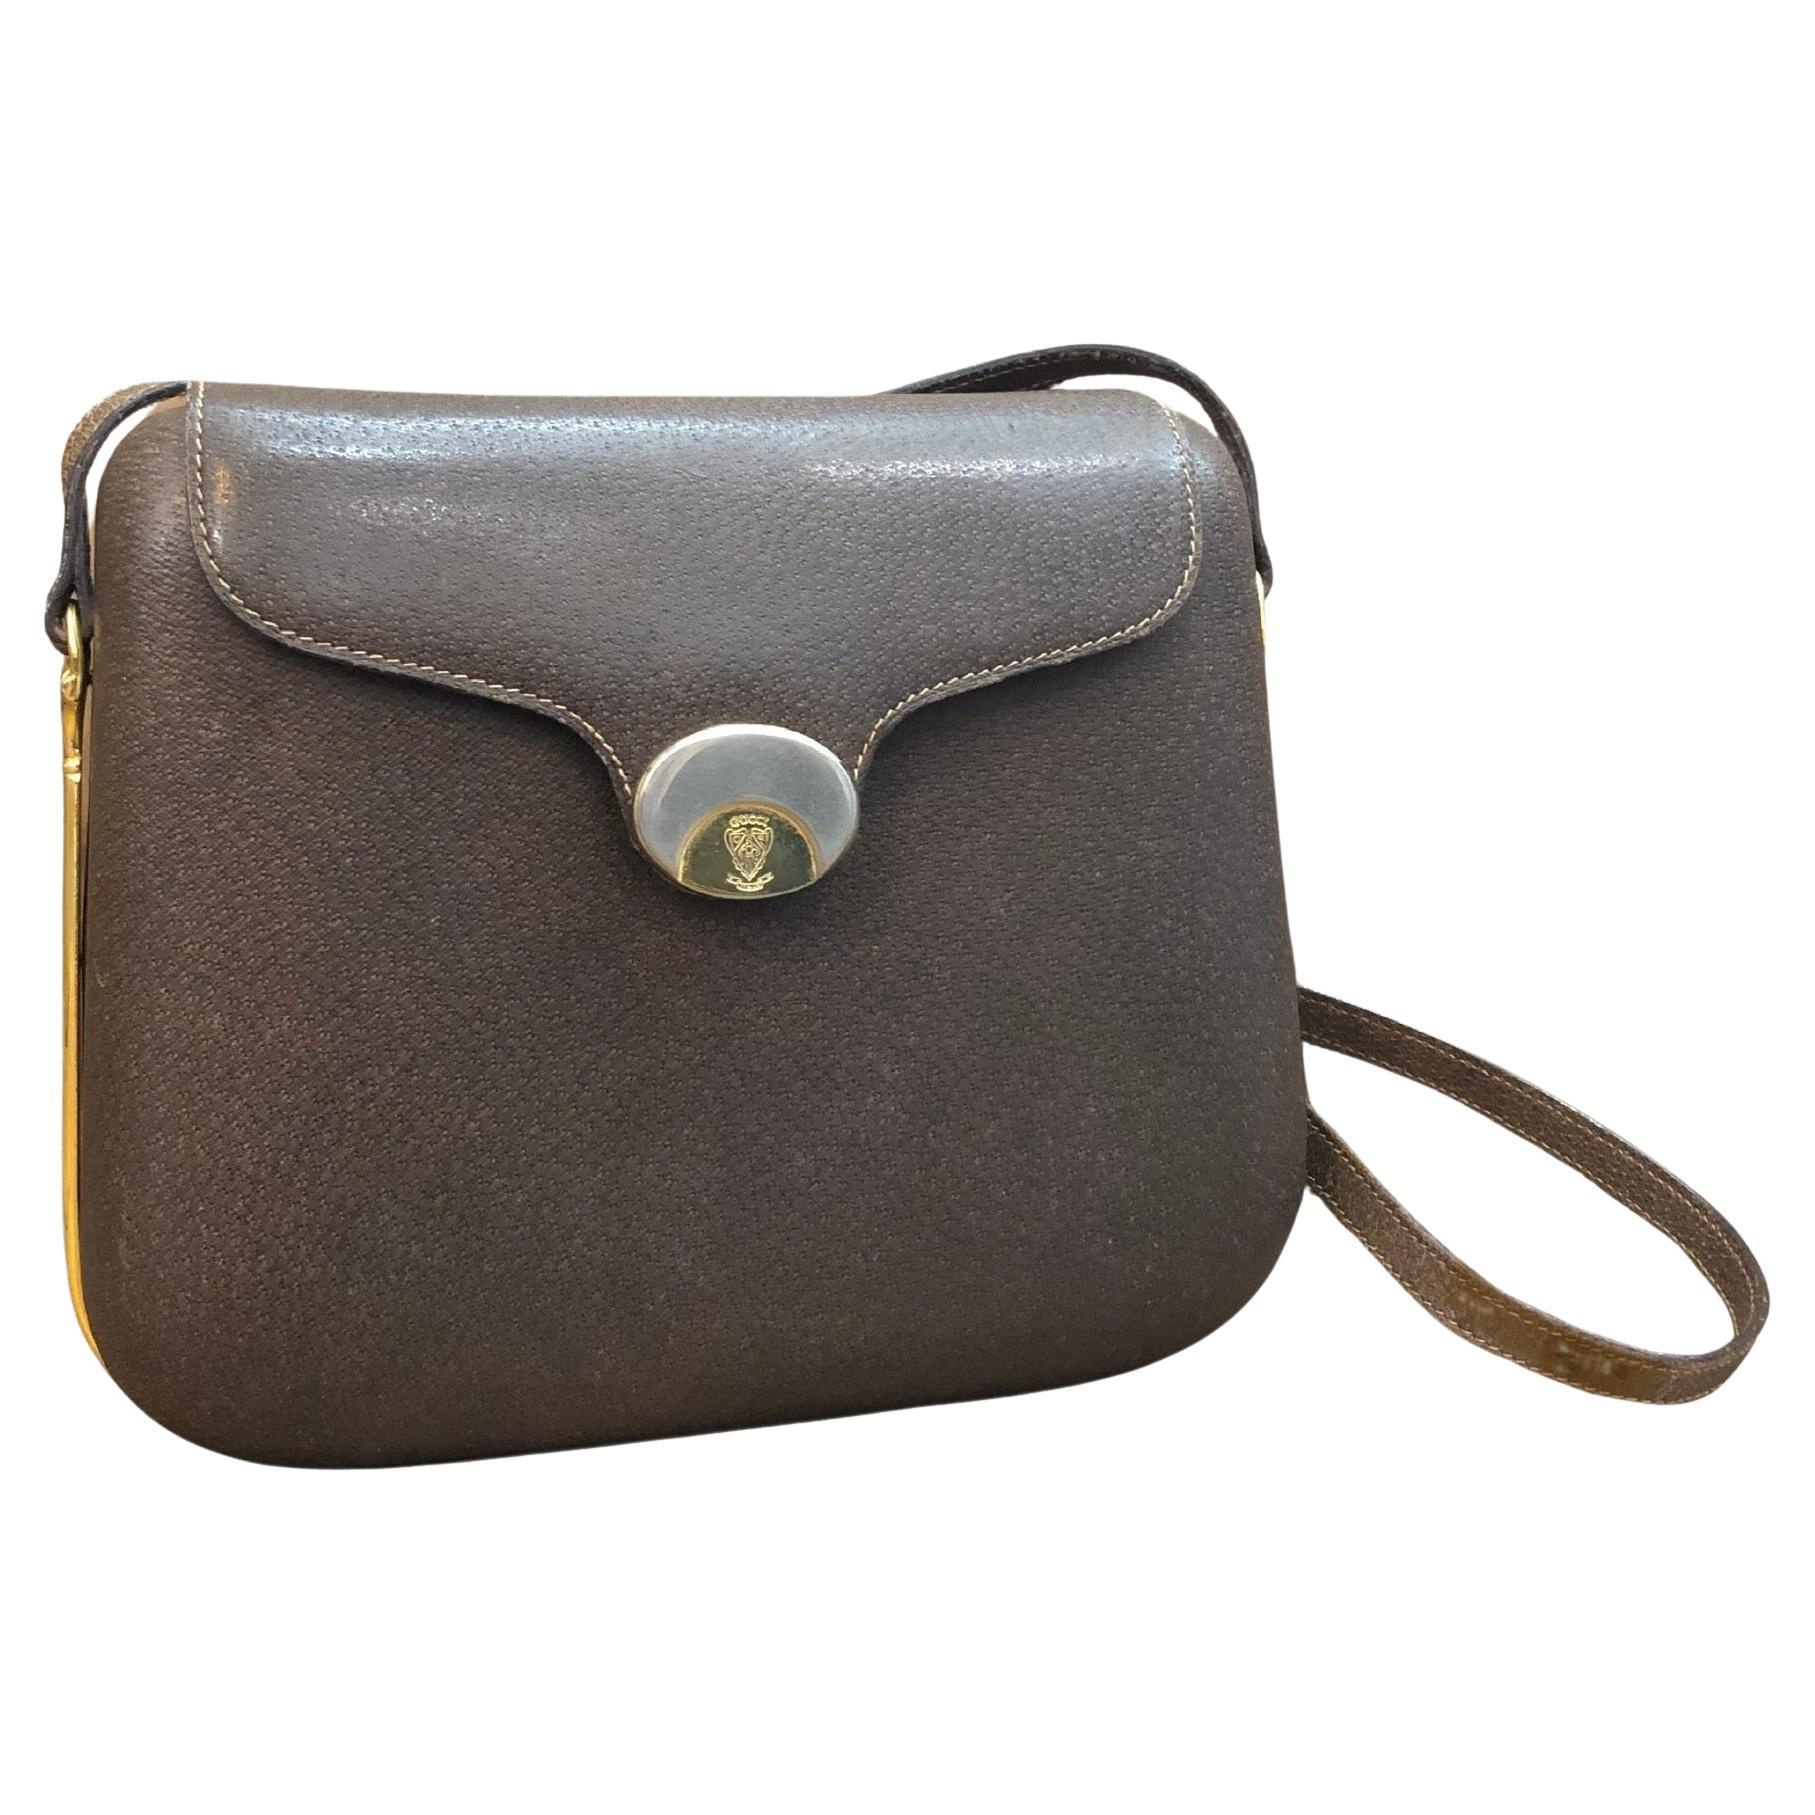 MNG Accessories Mini Faux Leather Purse With Attached Change Purse